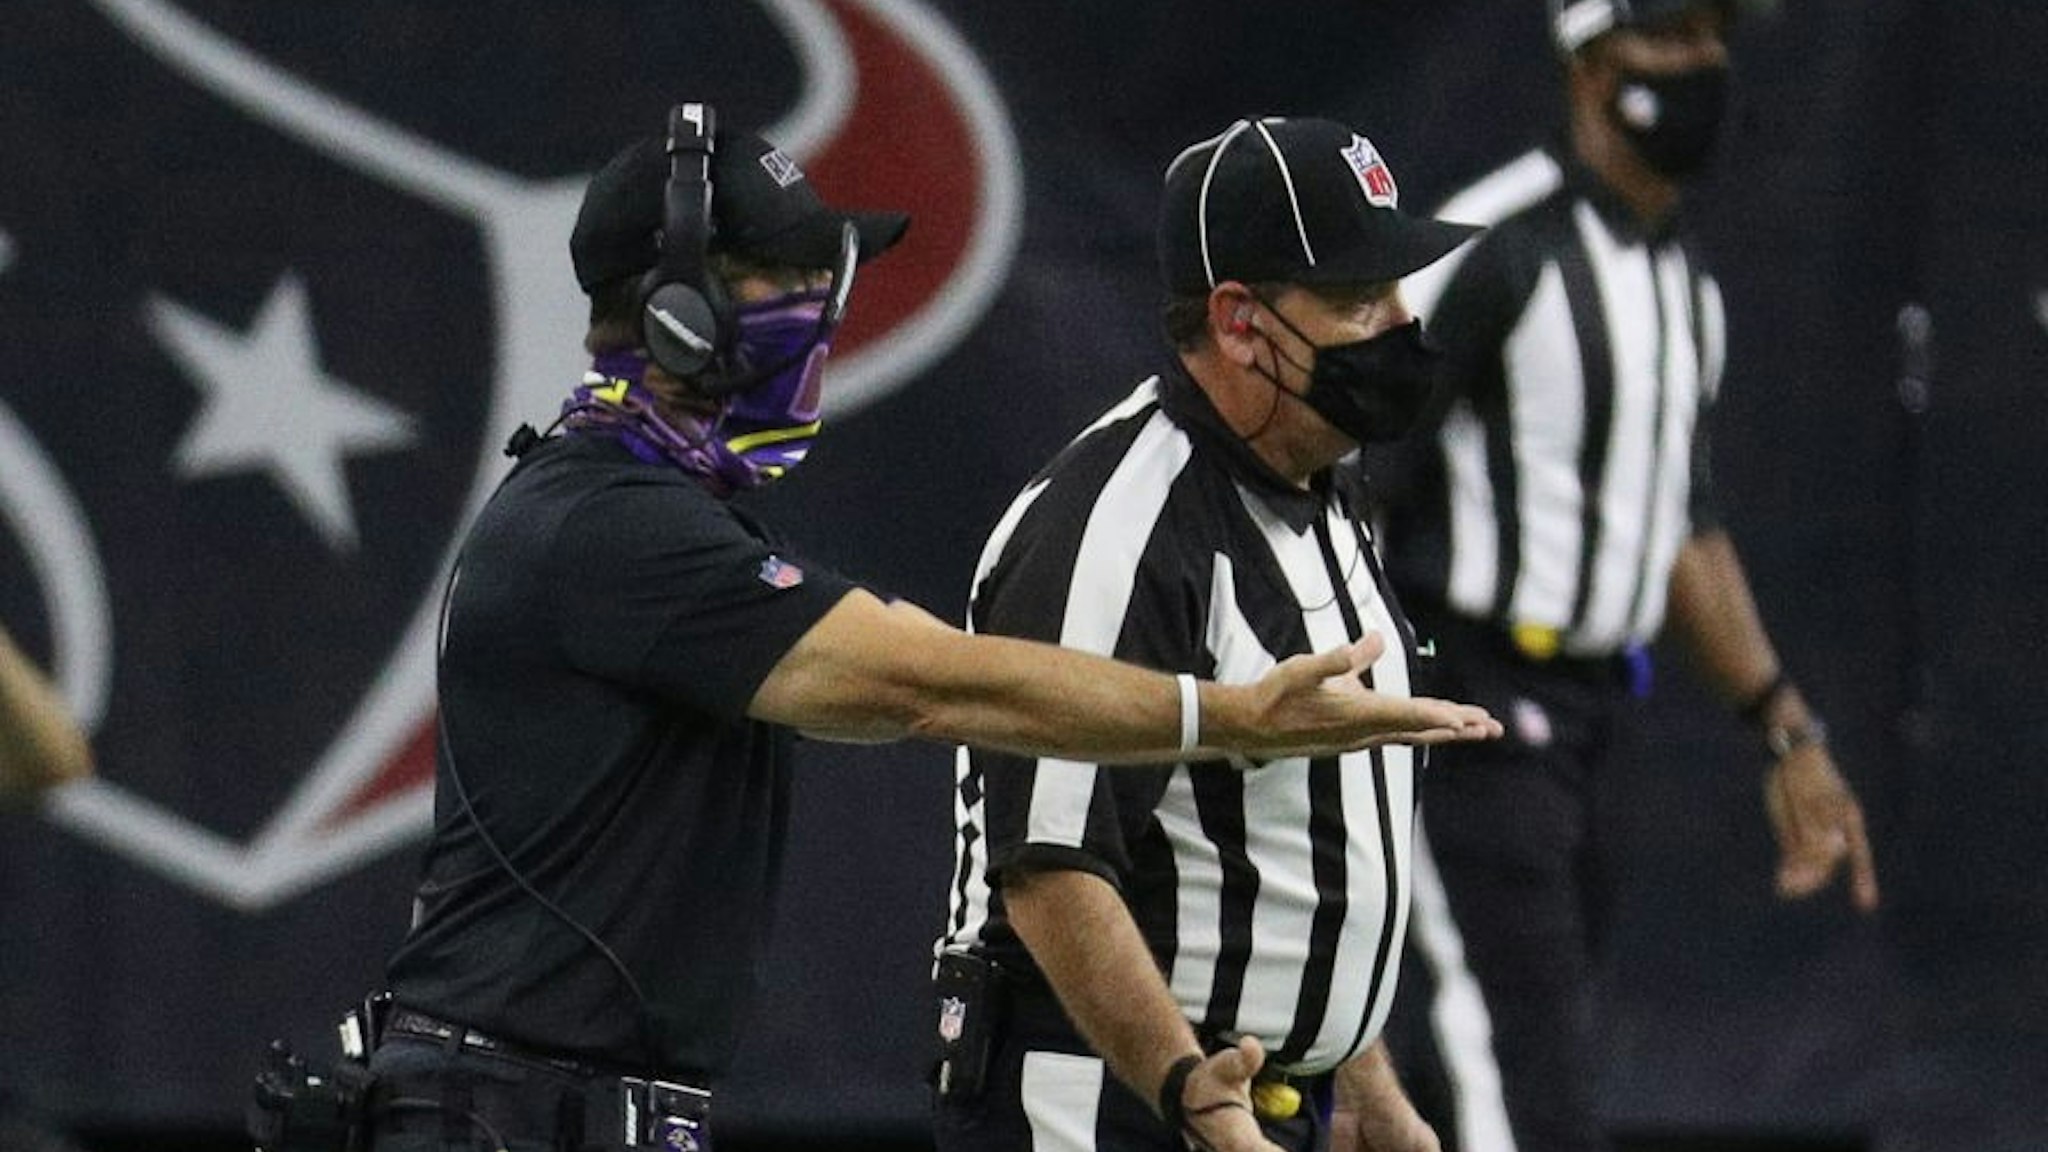 HOUSTON, TEXAS - SEPTEMBER 20: Head coach John Harbaugh of the Baltimore Ravens argues with the official after extra time was put back on the clock and Houston Texans kicked a field goal at NRG Stadium on September 20, 2020 in Houston, Texas. (Photo by